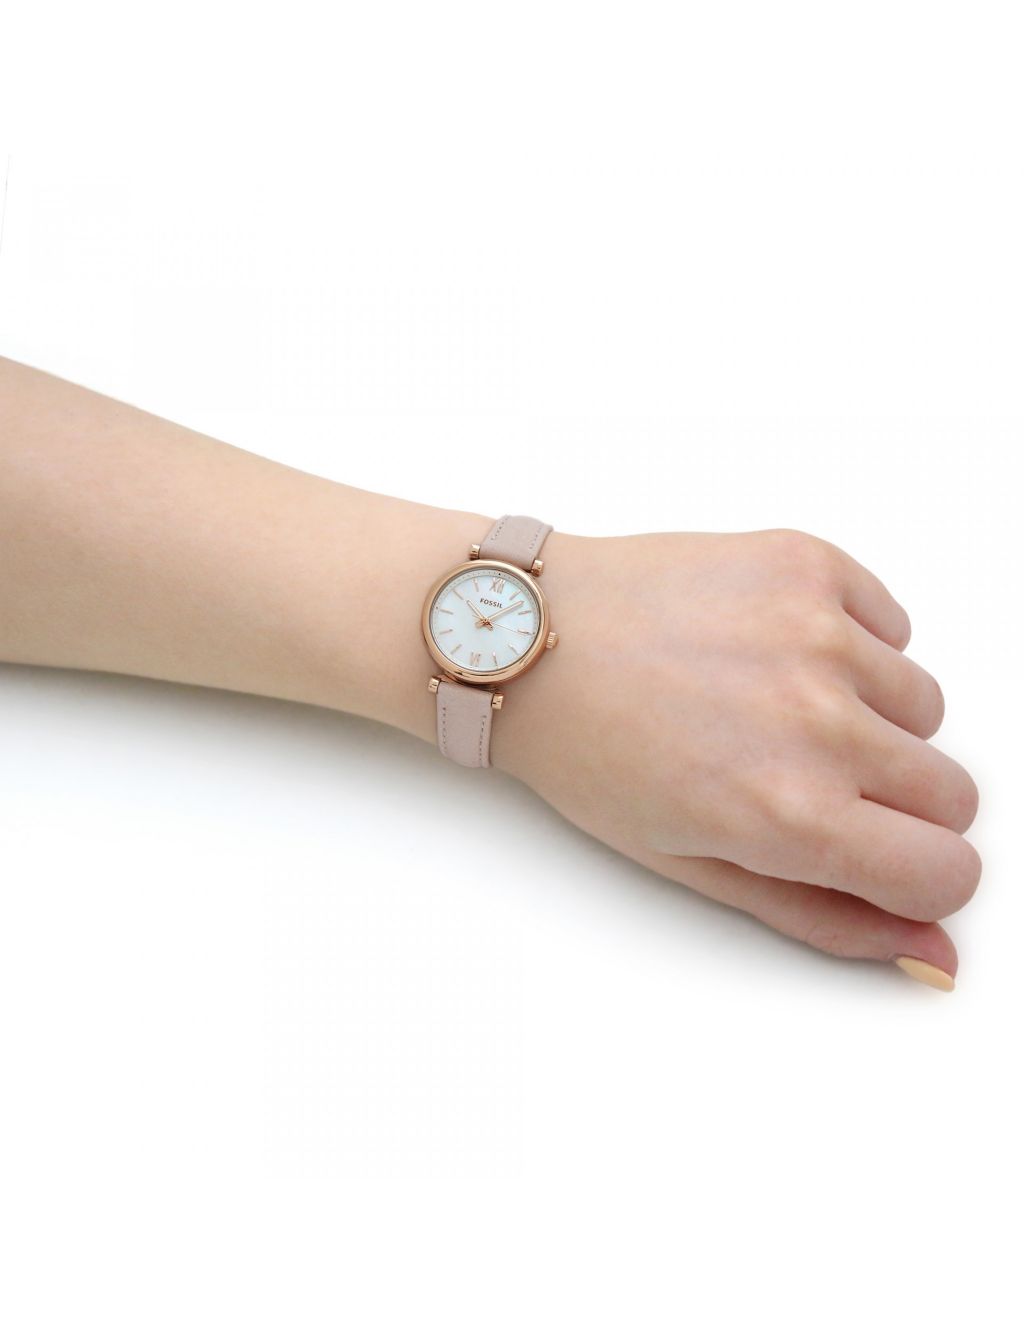 Fossil Carlie Nude Leather Watch image 2